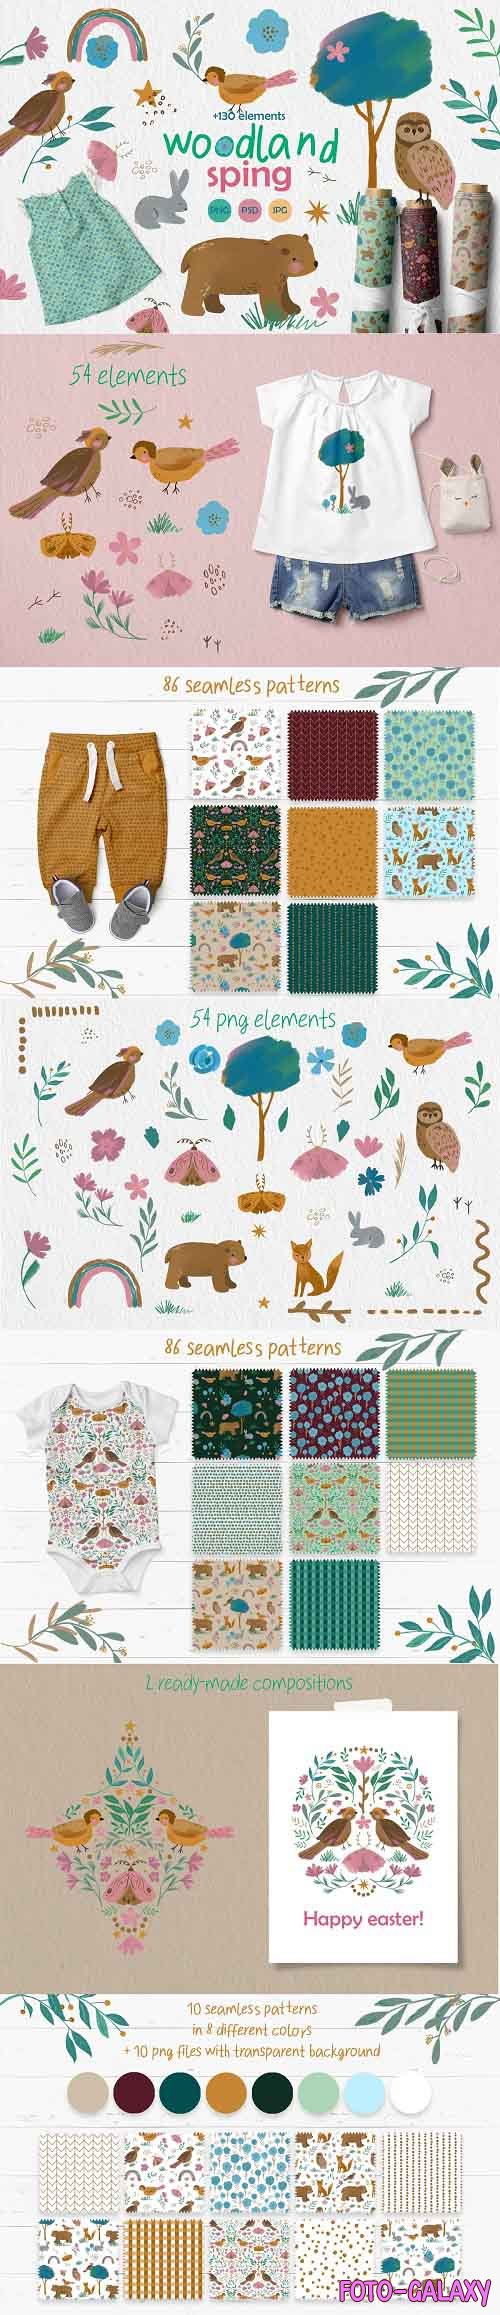 Woodland spring, clipart & patterns - 5830263